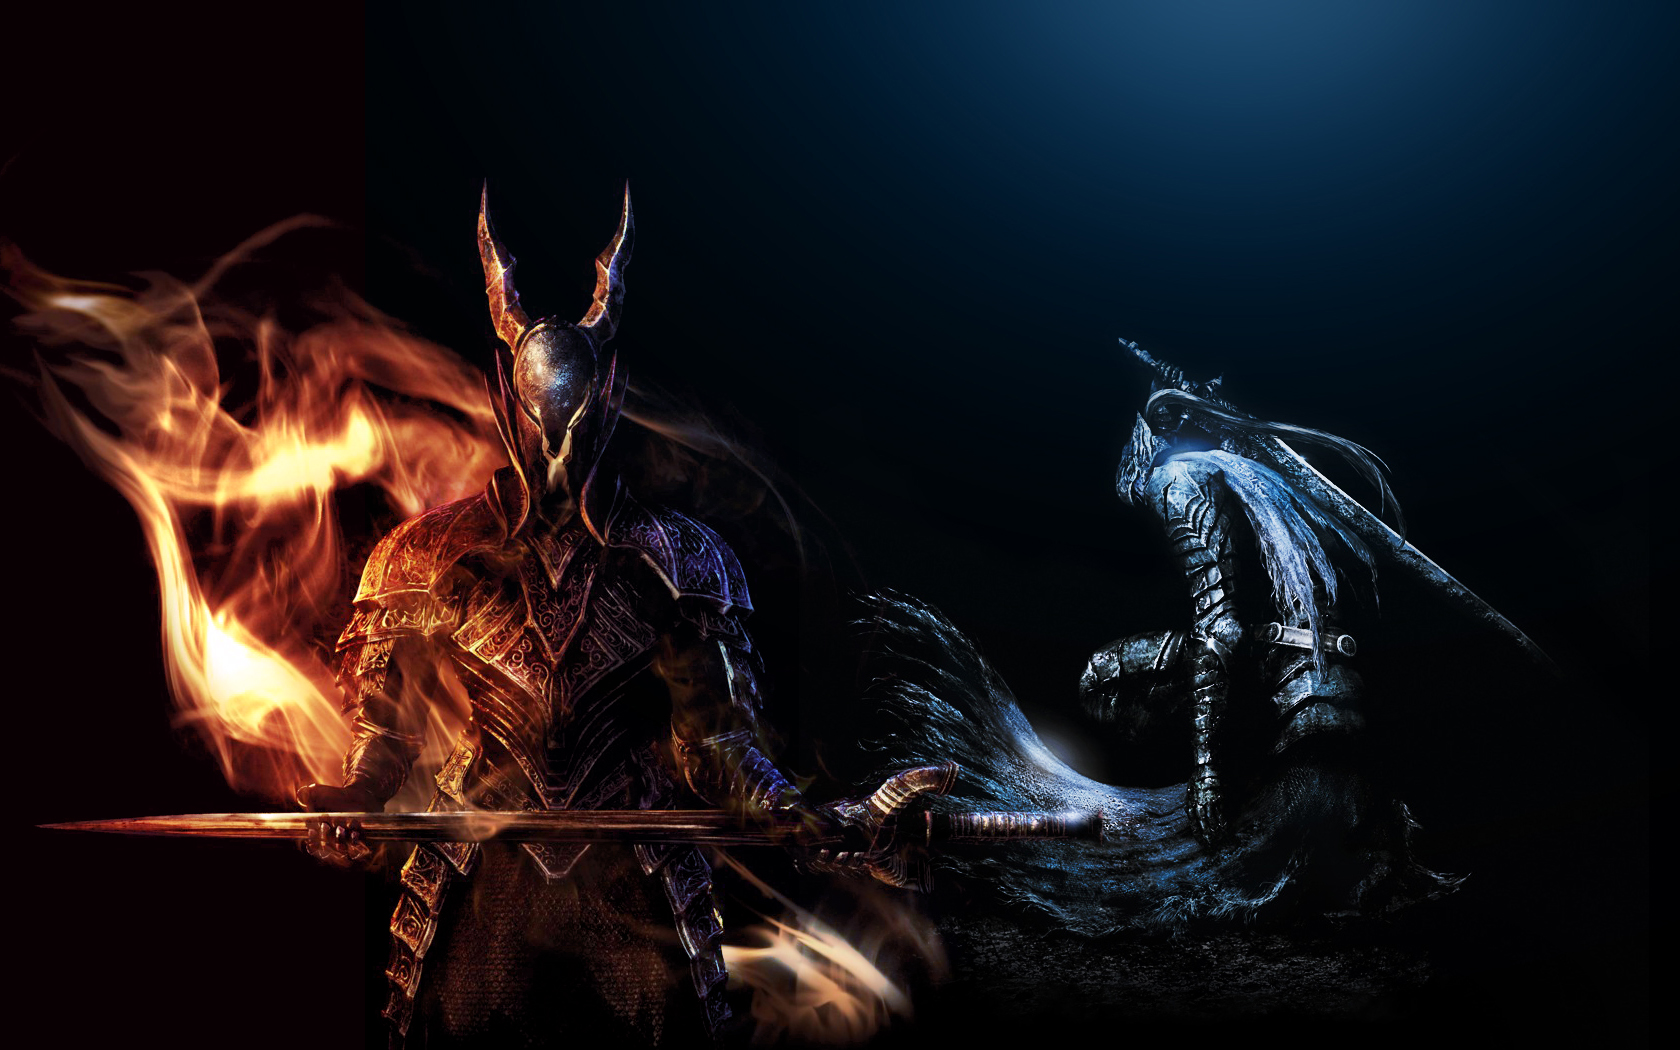 Dark Souls : Artorias of the Abyss by Xm1911a1 on DeviantArt